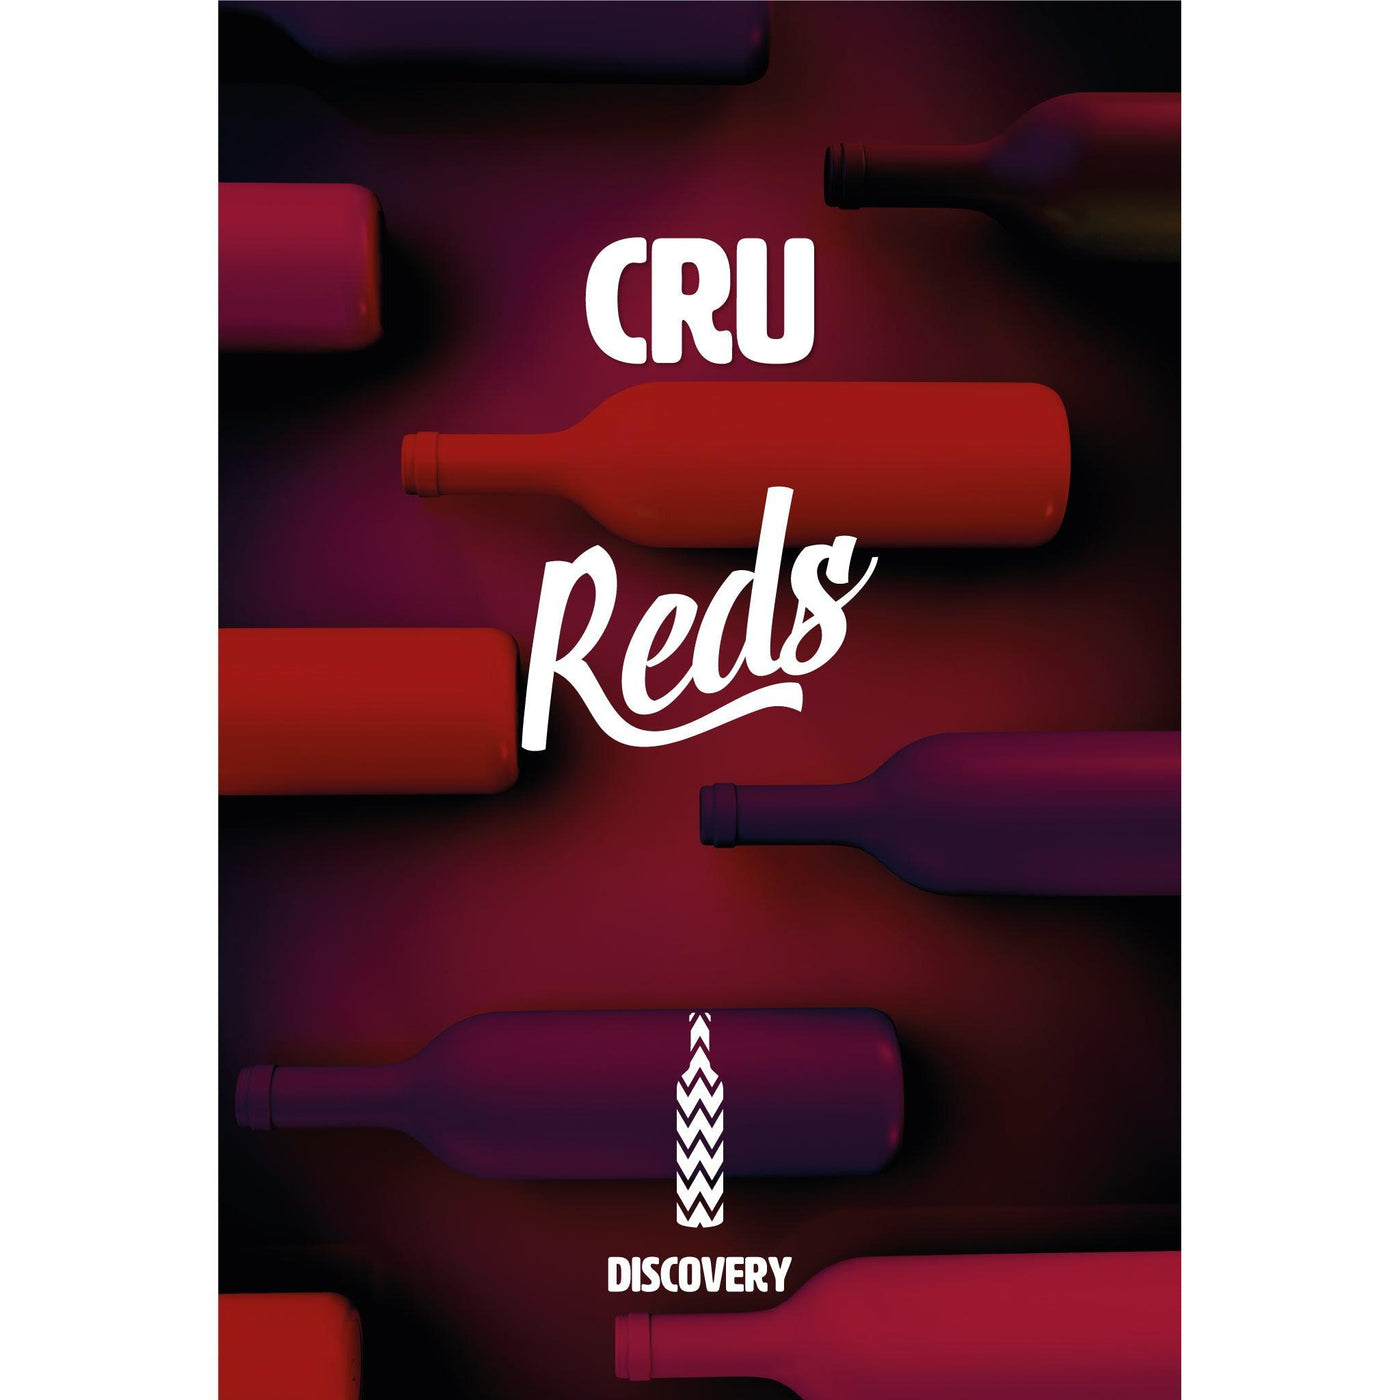 Discovery Cru Reds 6 Months